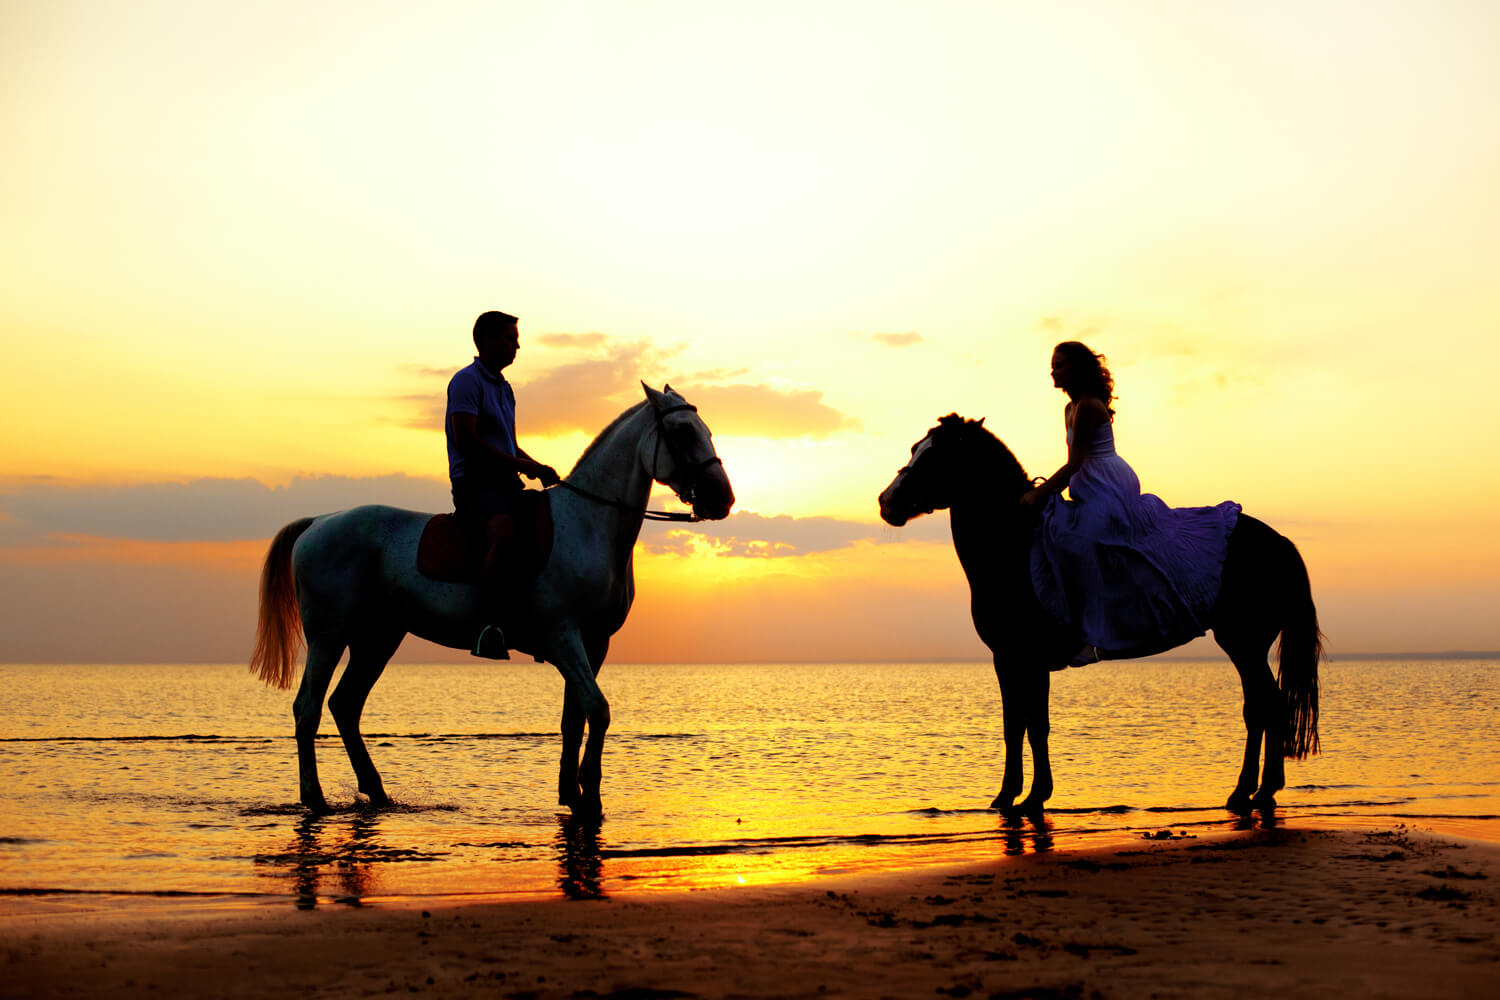 Ridiing Horses on the Beach at Sunset